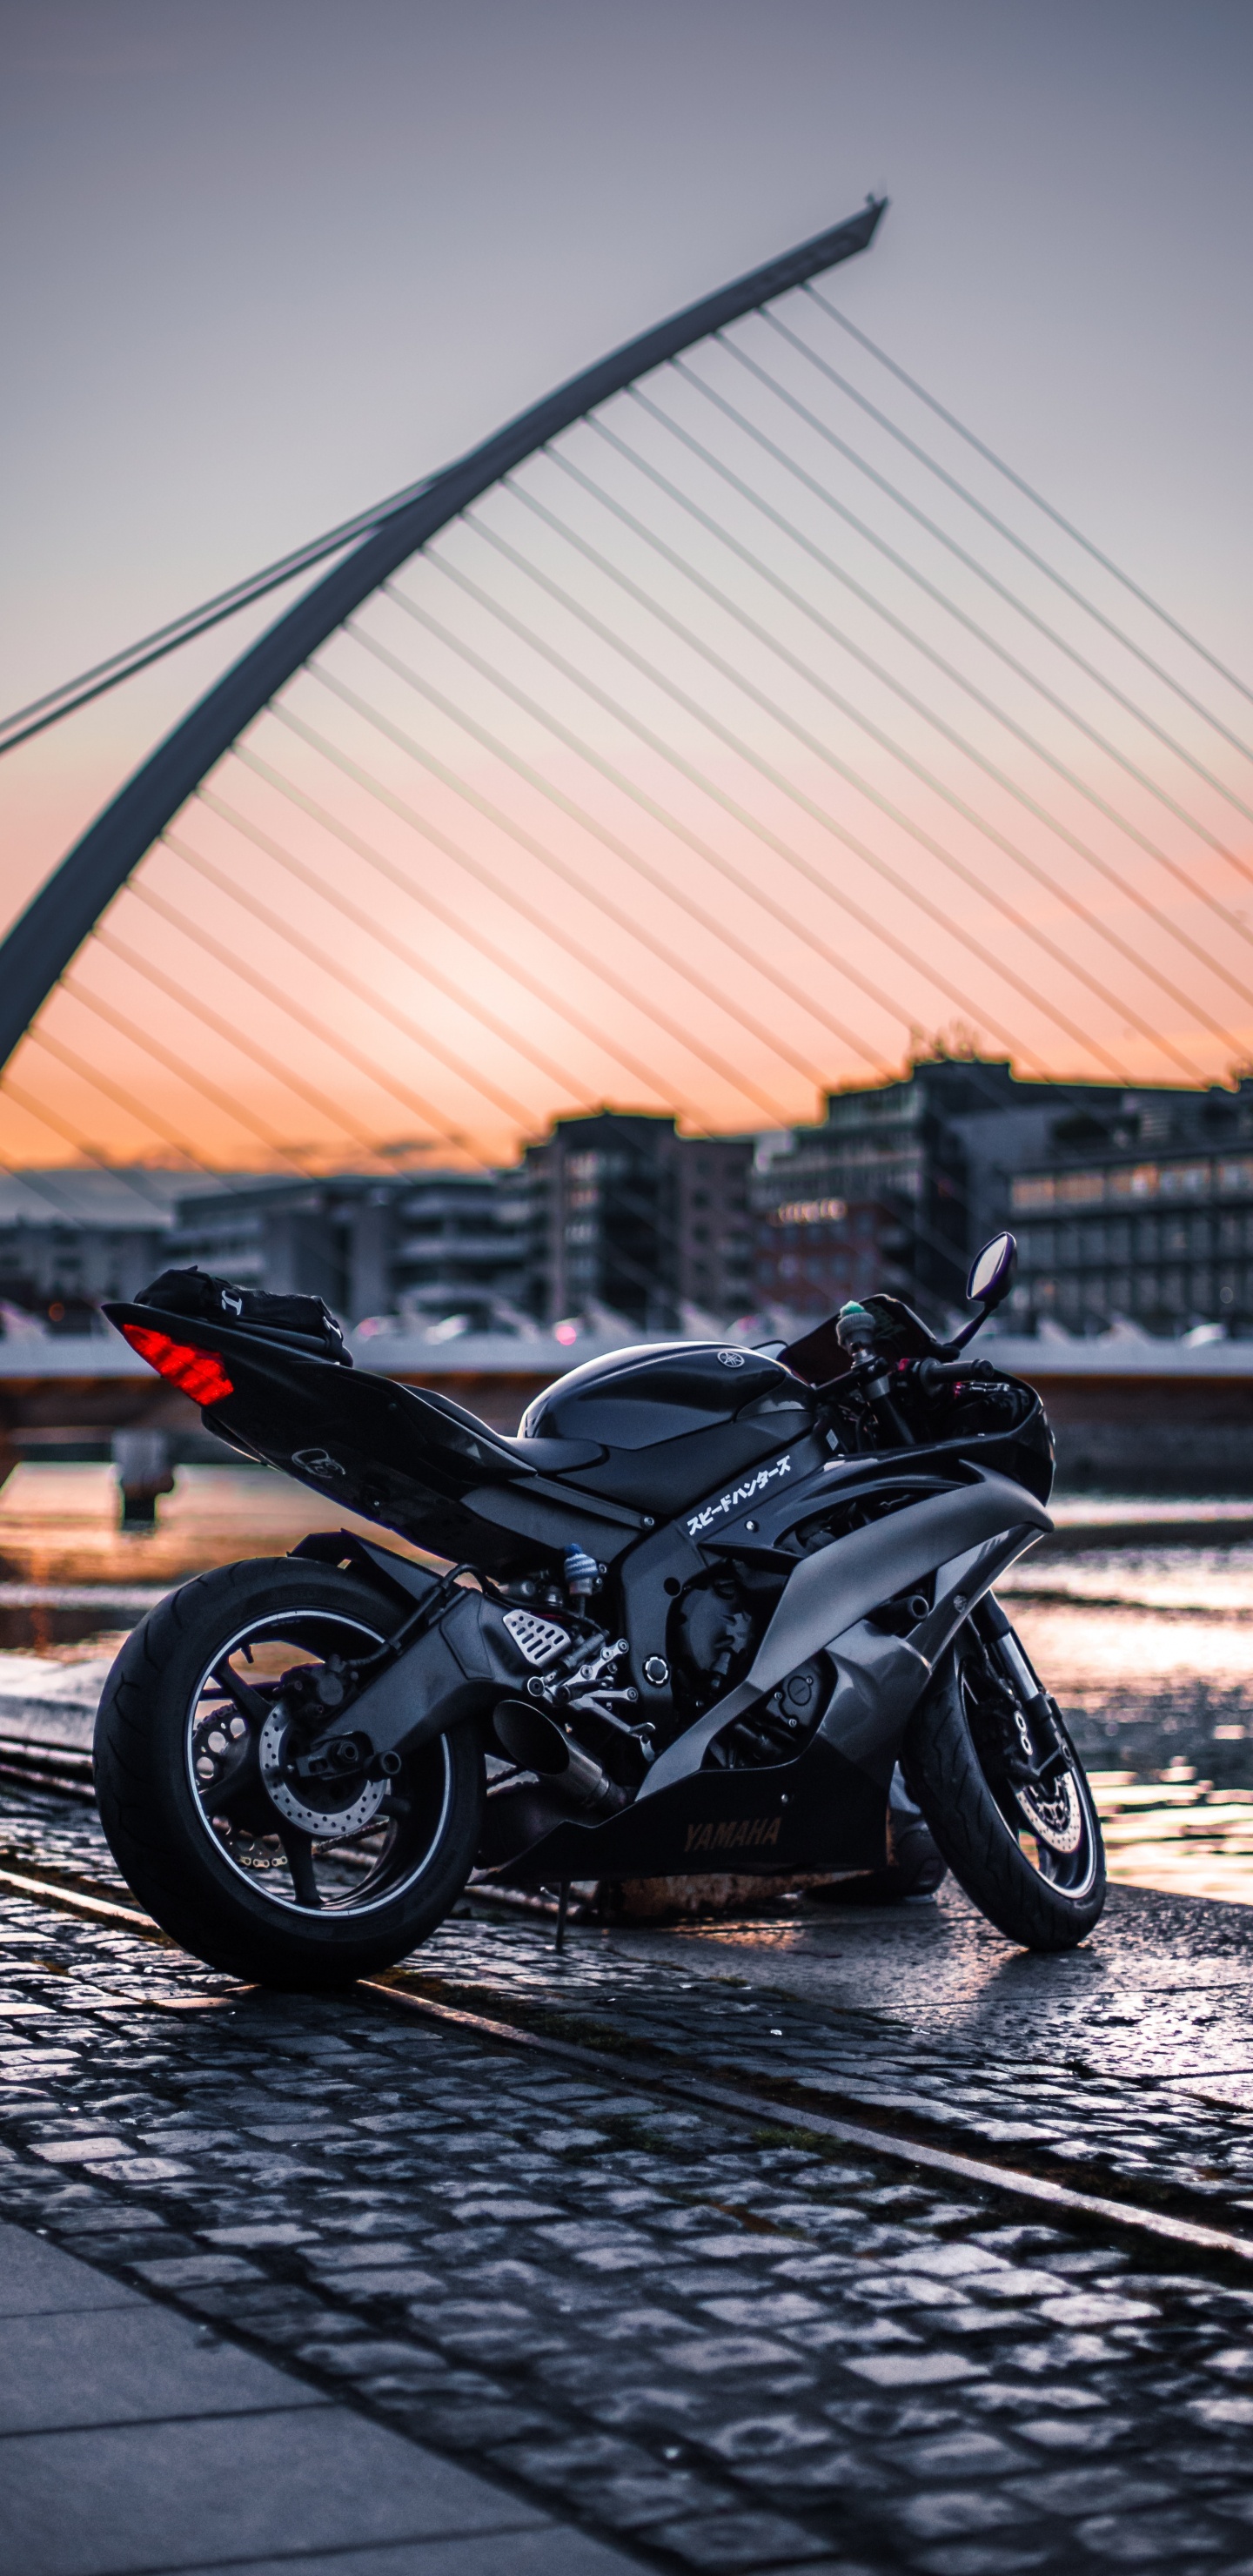 Black Sports Bike Parked on The Side of The Road. Wallpaper in 1440x2960 Resolution